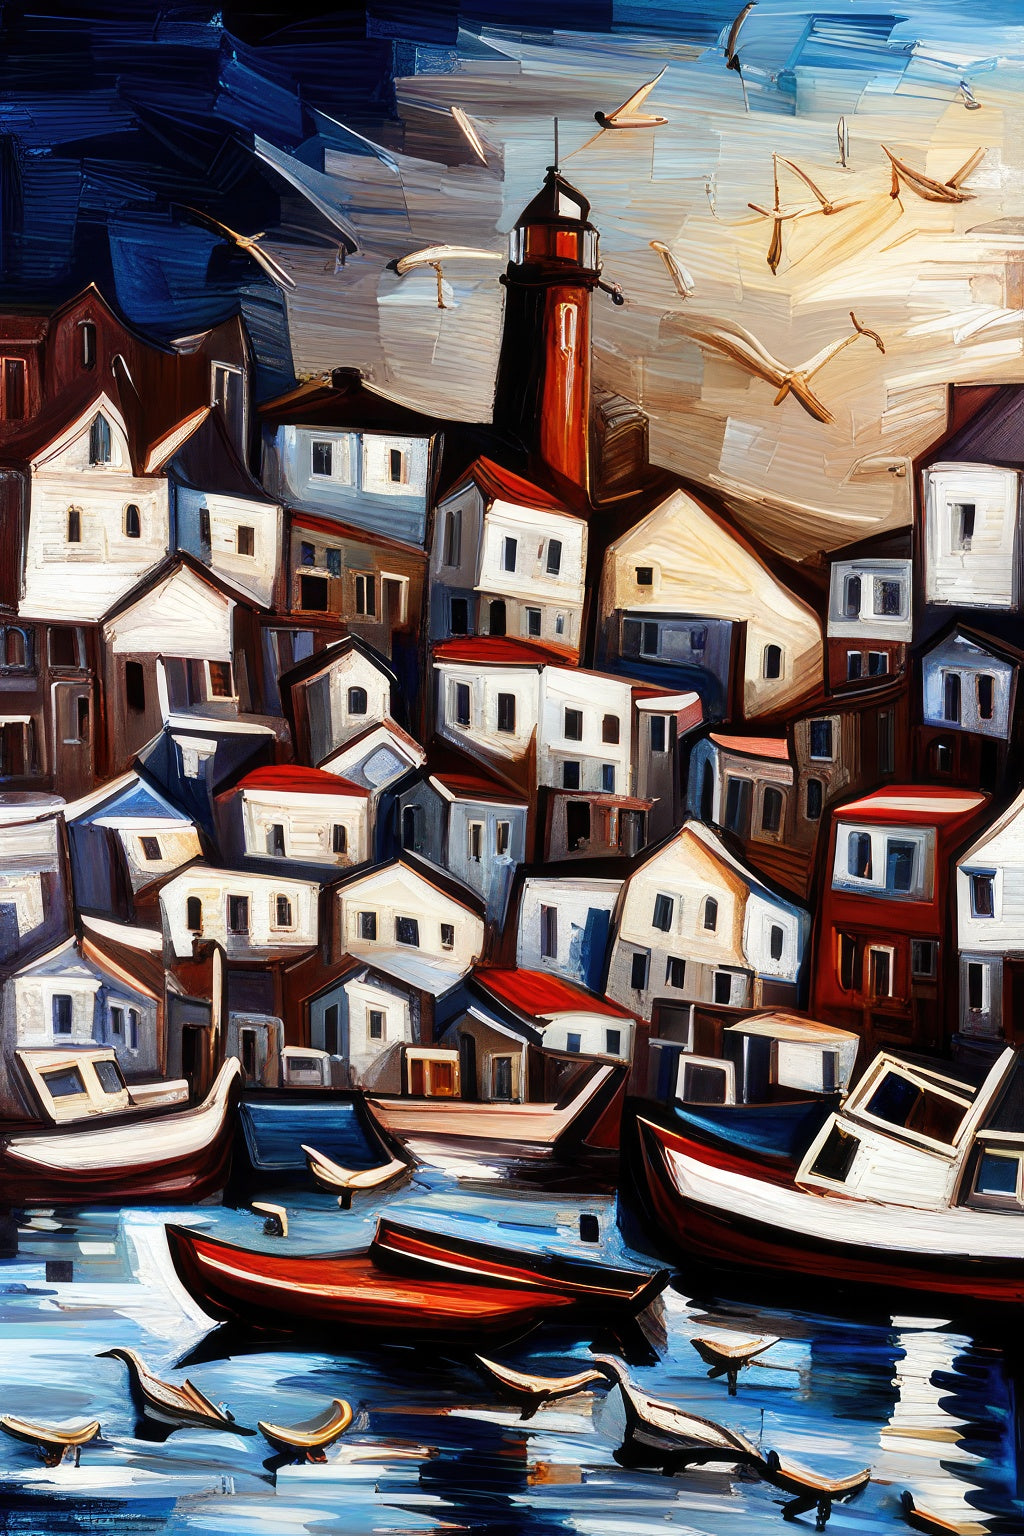 Docked Boats in The Harbor Abstract Oil Painting Art Print